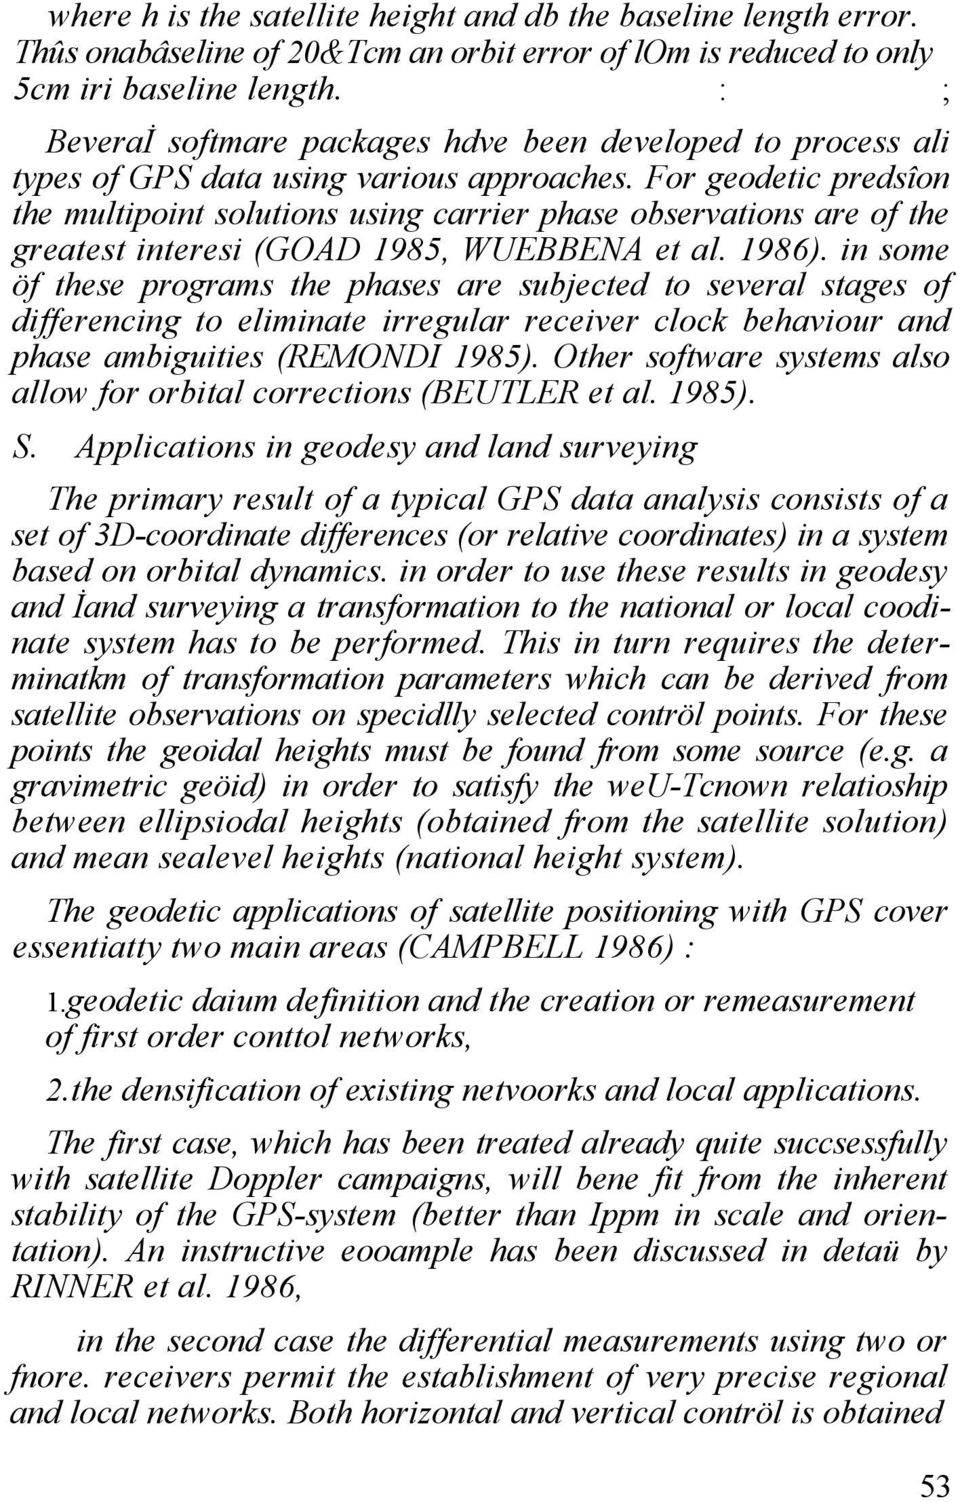 For geodetic predsîon the multipoint solutions using carrier phase observations are of the greatest interesi (GOAD 1985, WUEBBENA et al. 1986).